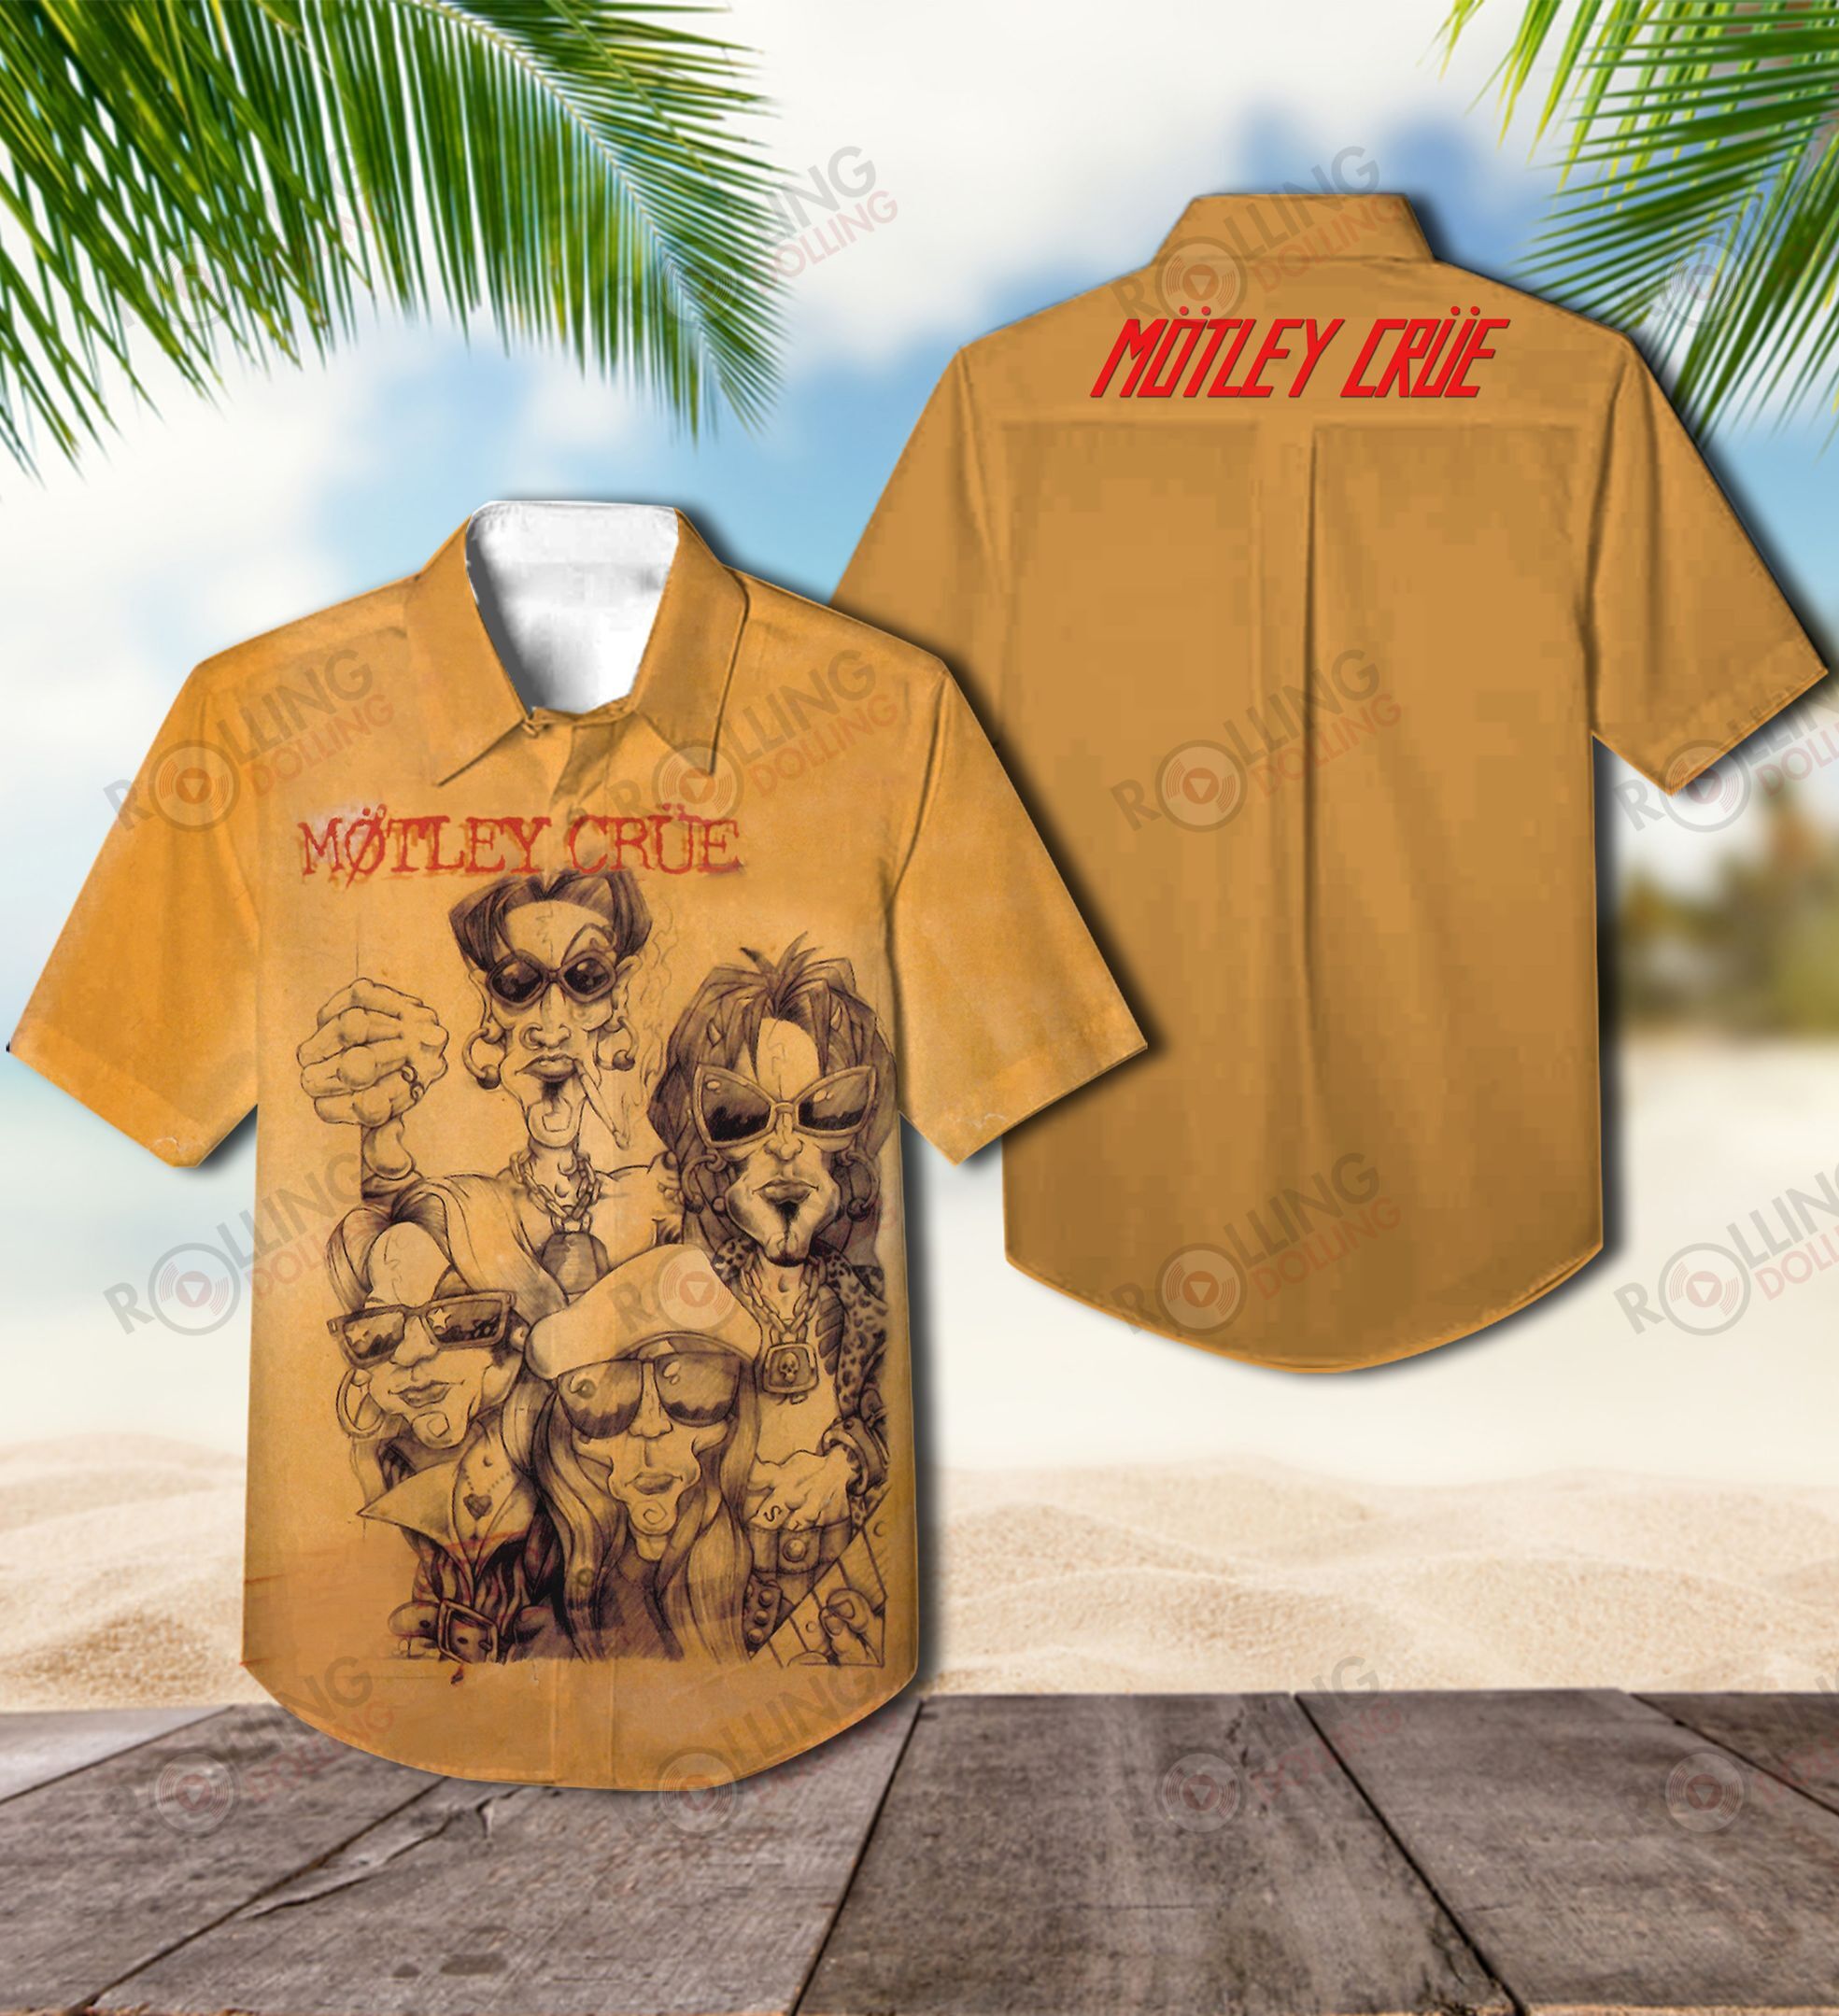 This would make a great gift for any fan who loves Hawaiian Shirt as well as Rock band 88